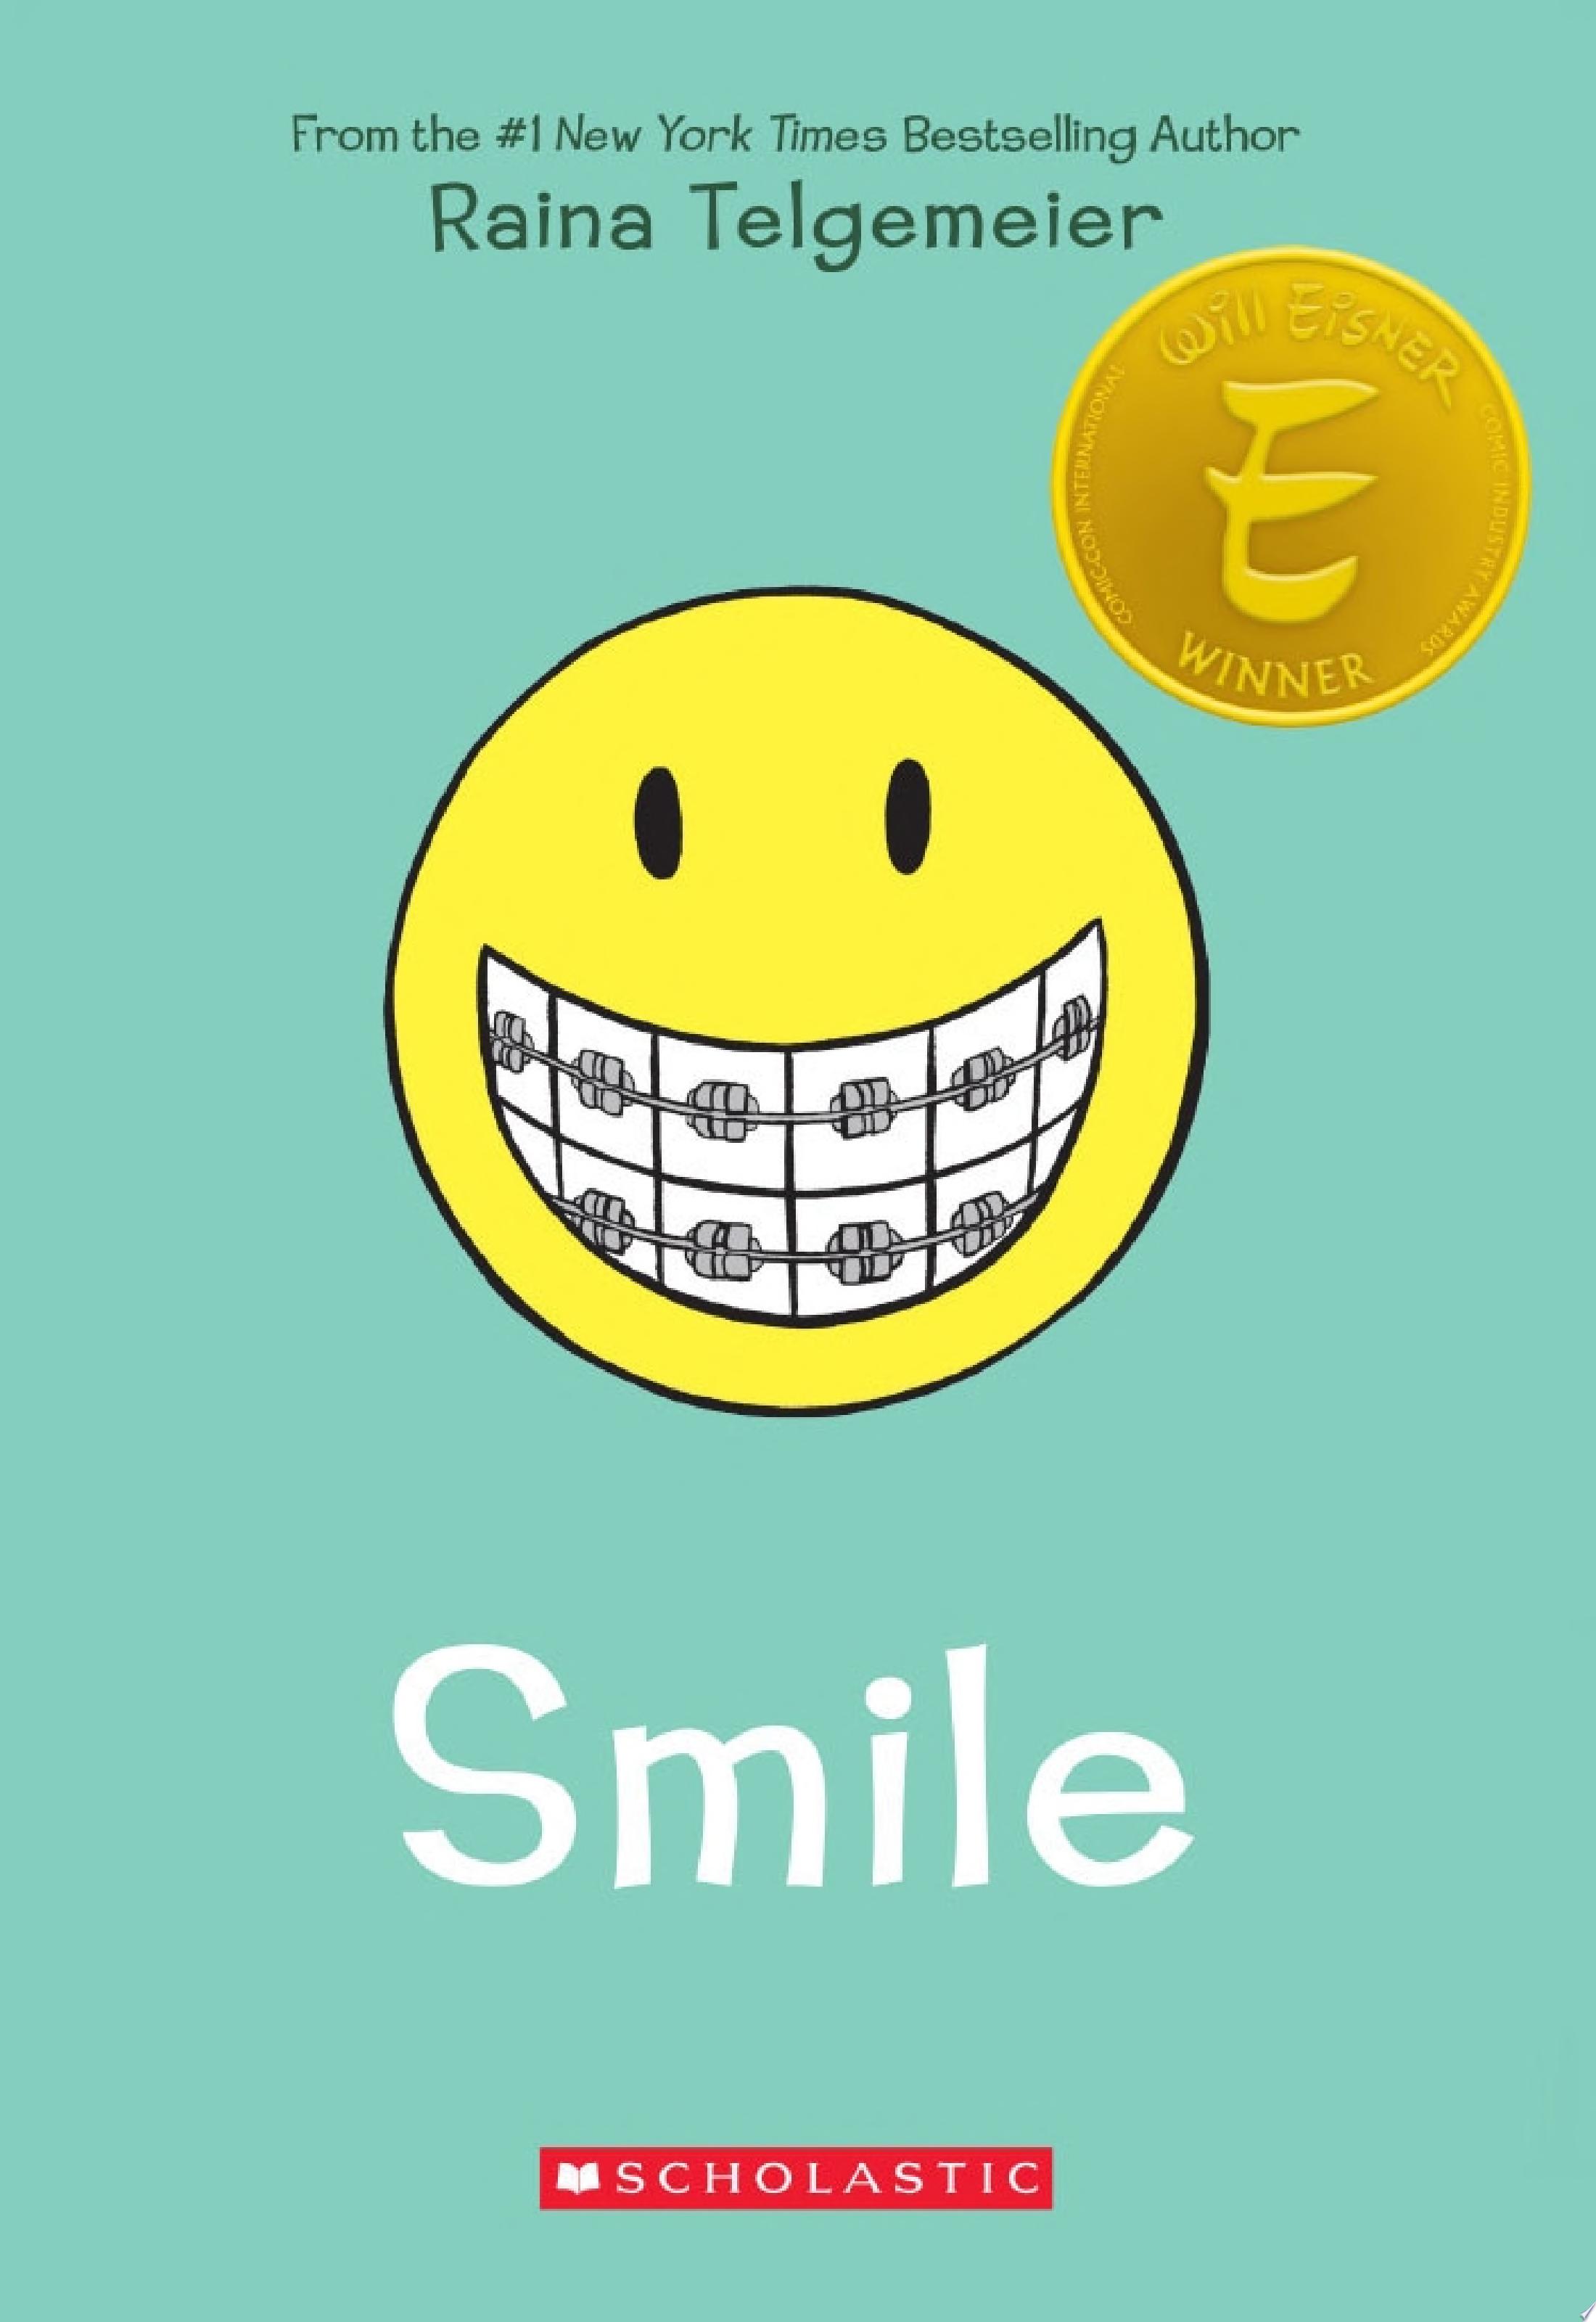 Image for "Smile: A Graphic Novel"